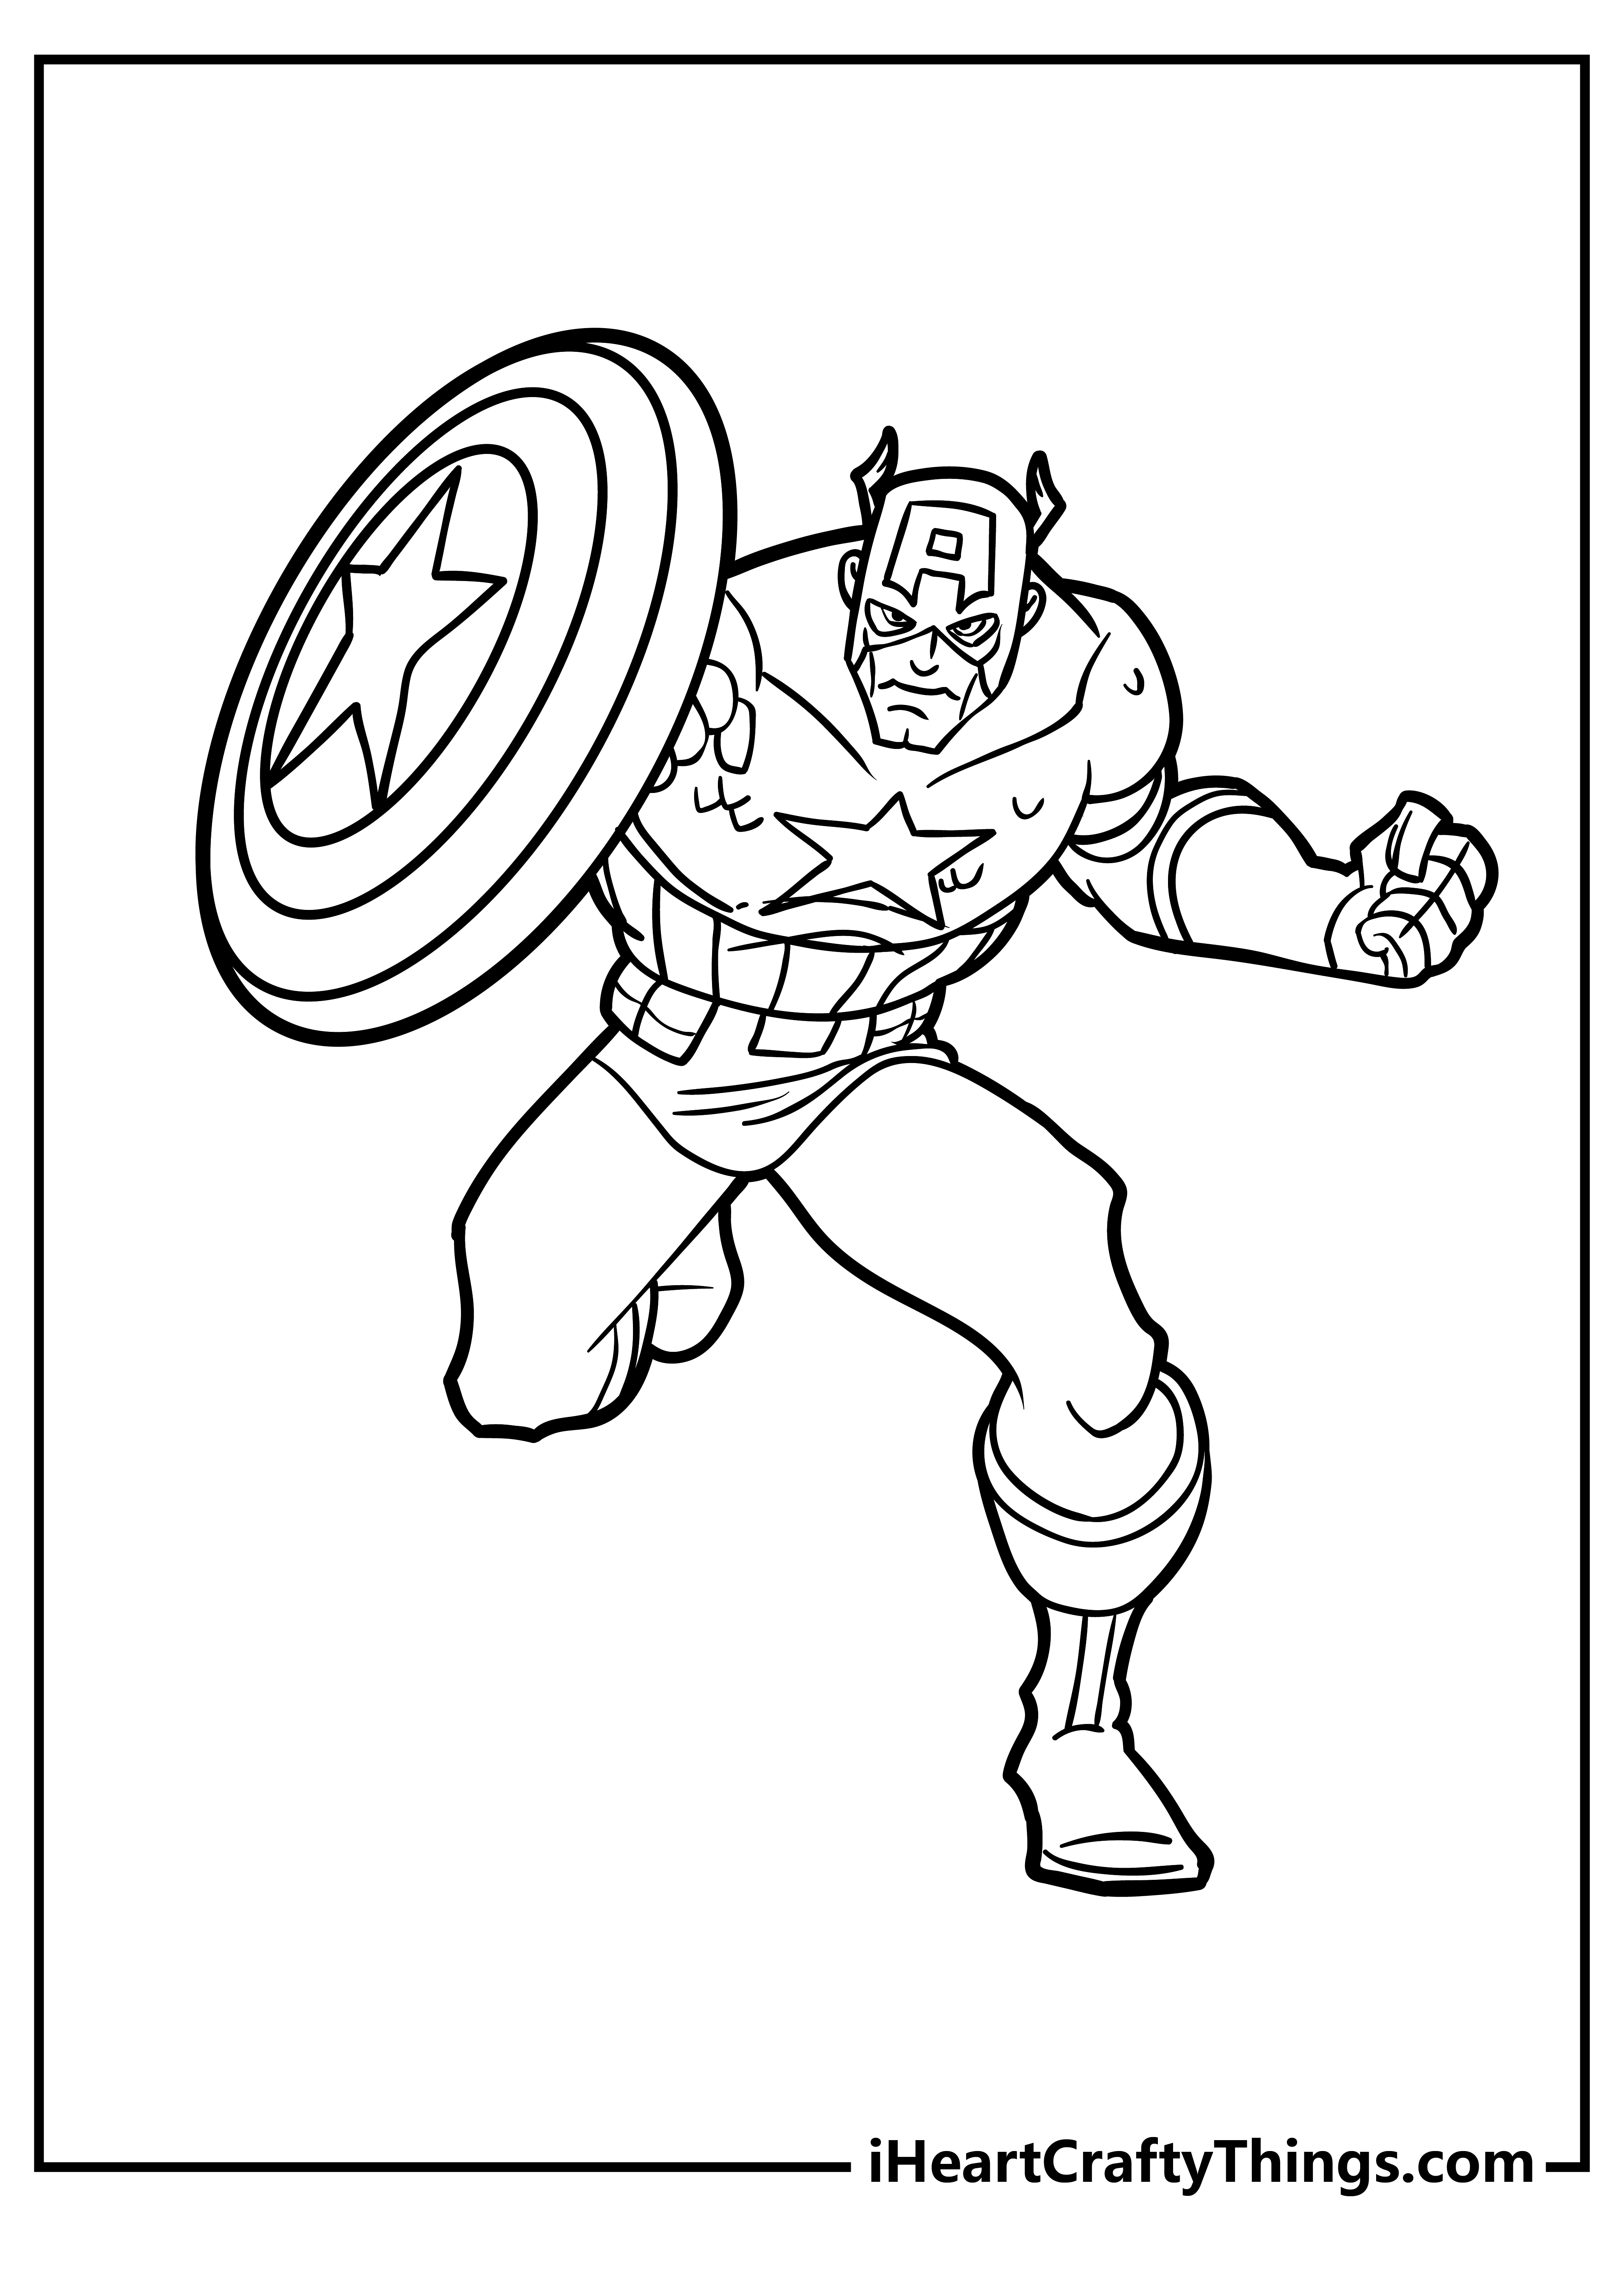 Captain America Coloring Pages free pdf download